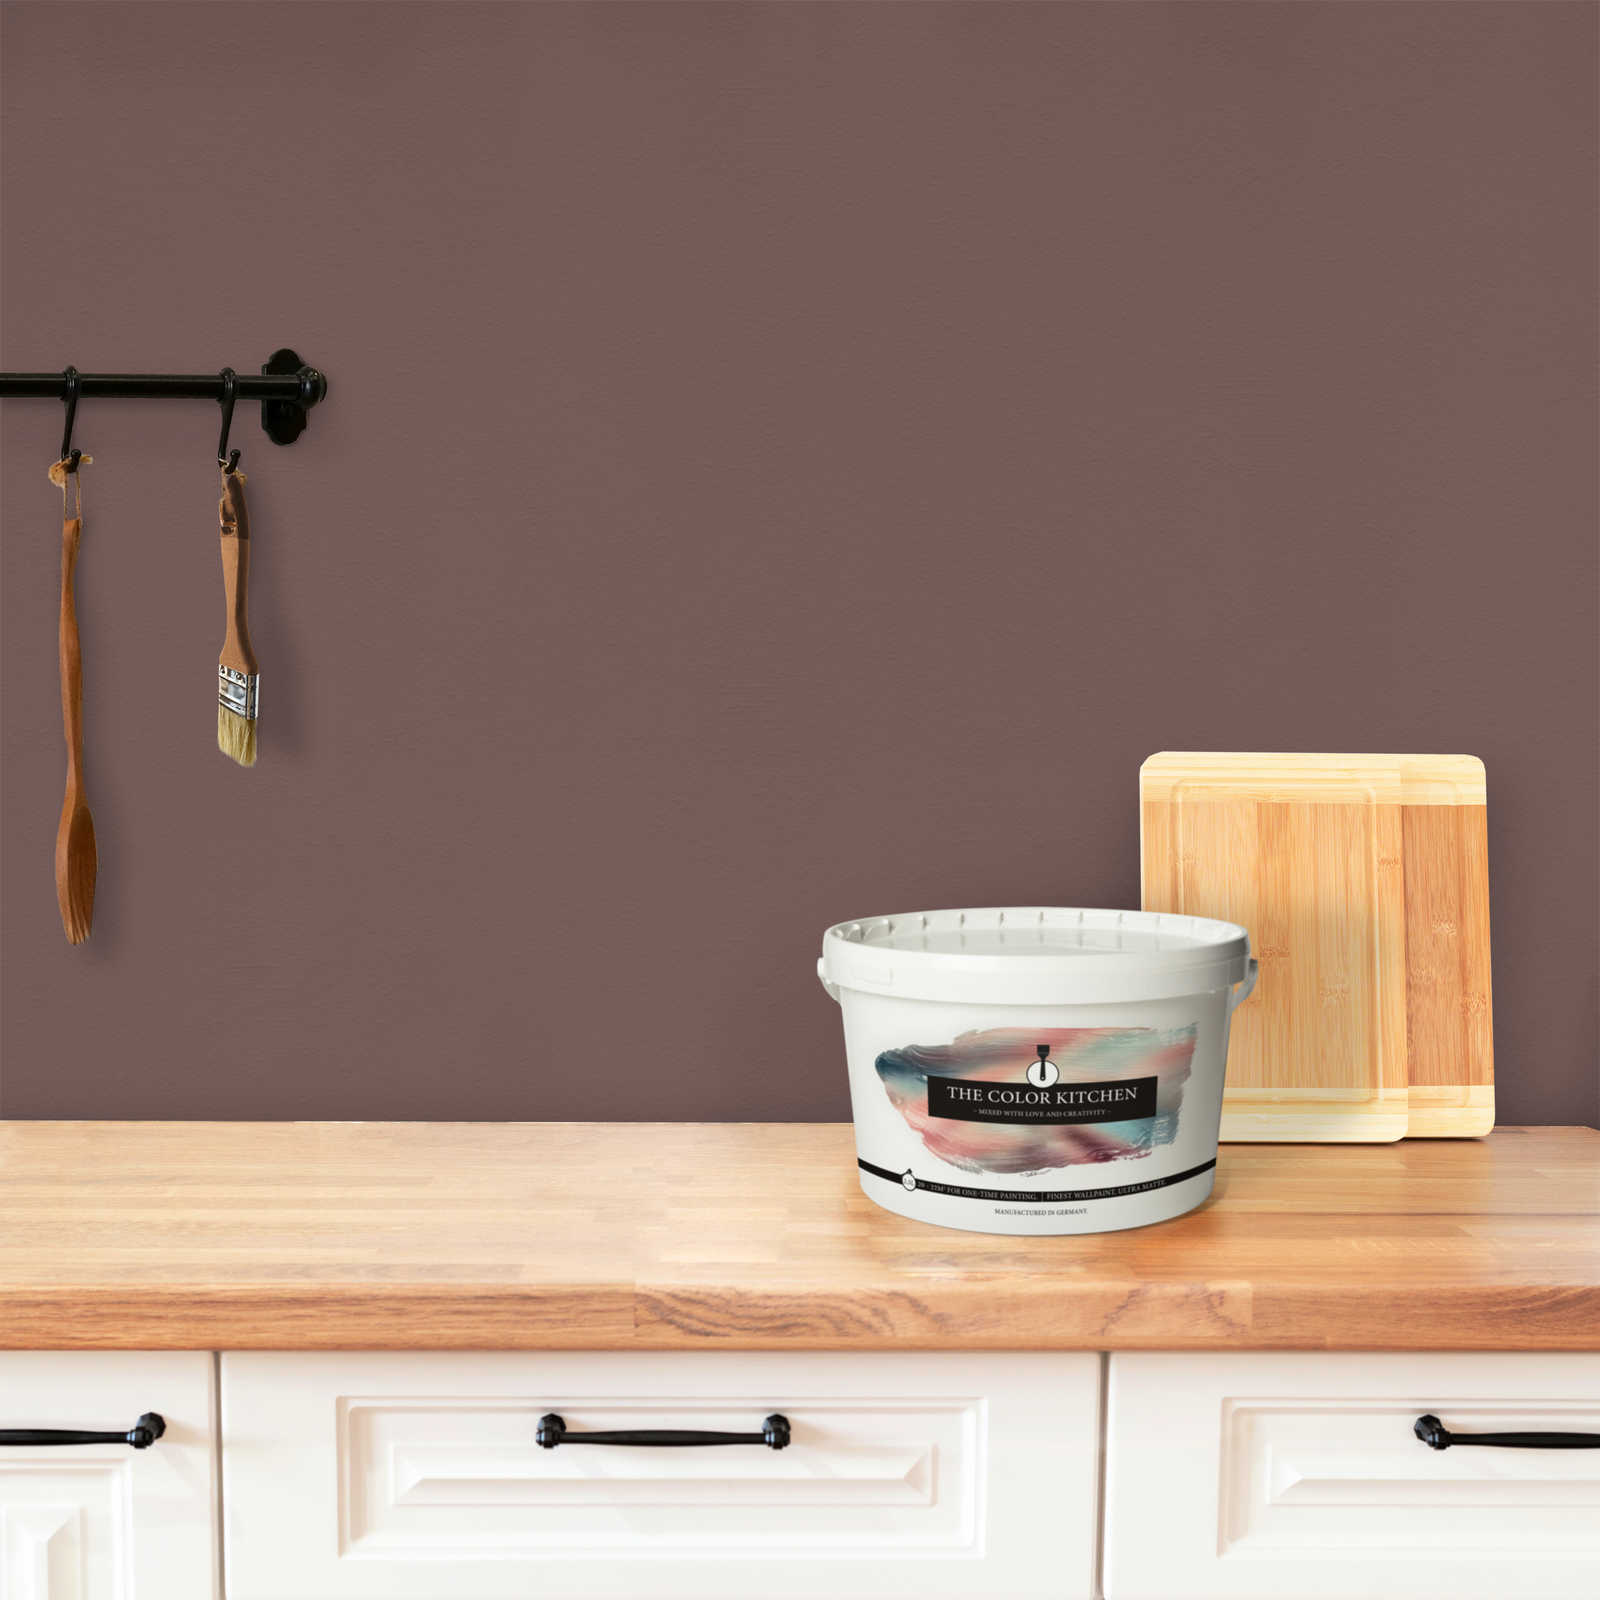             Wall Paint TCK5015 »Passion Fruit« in reddish brown – 2.5 litre
        